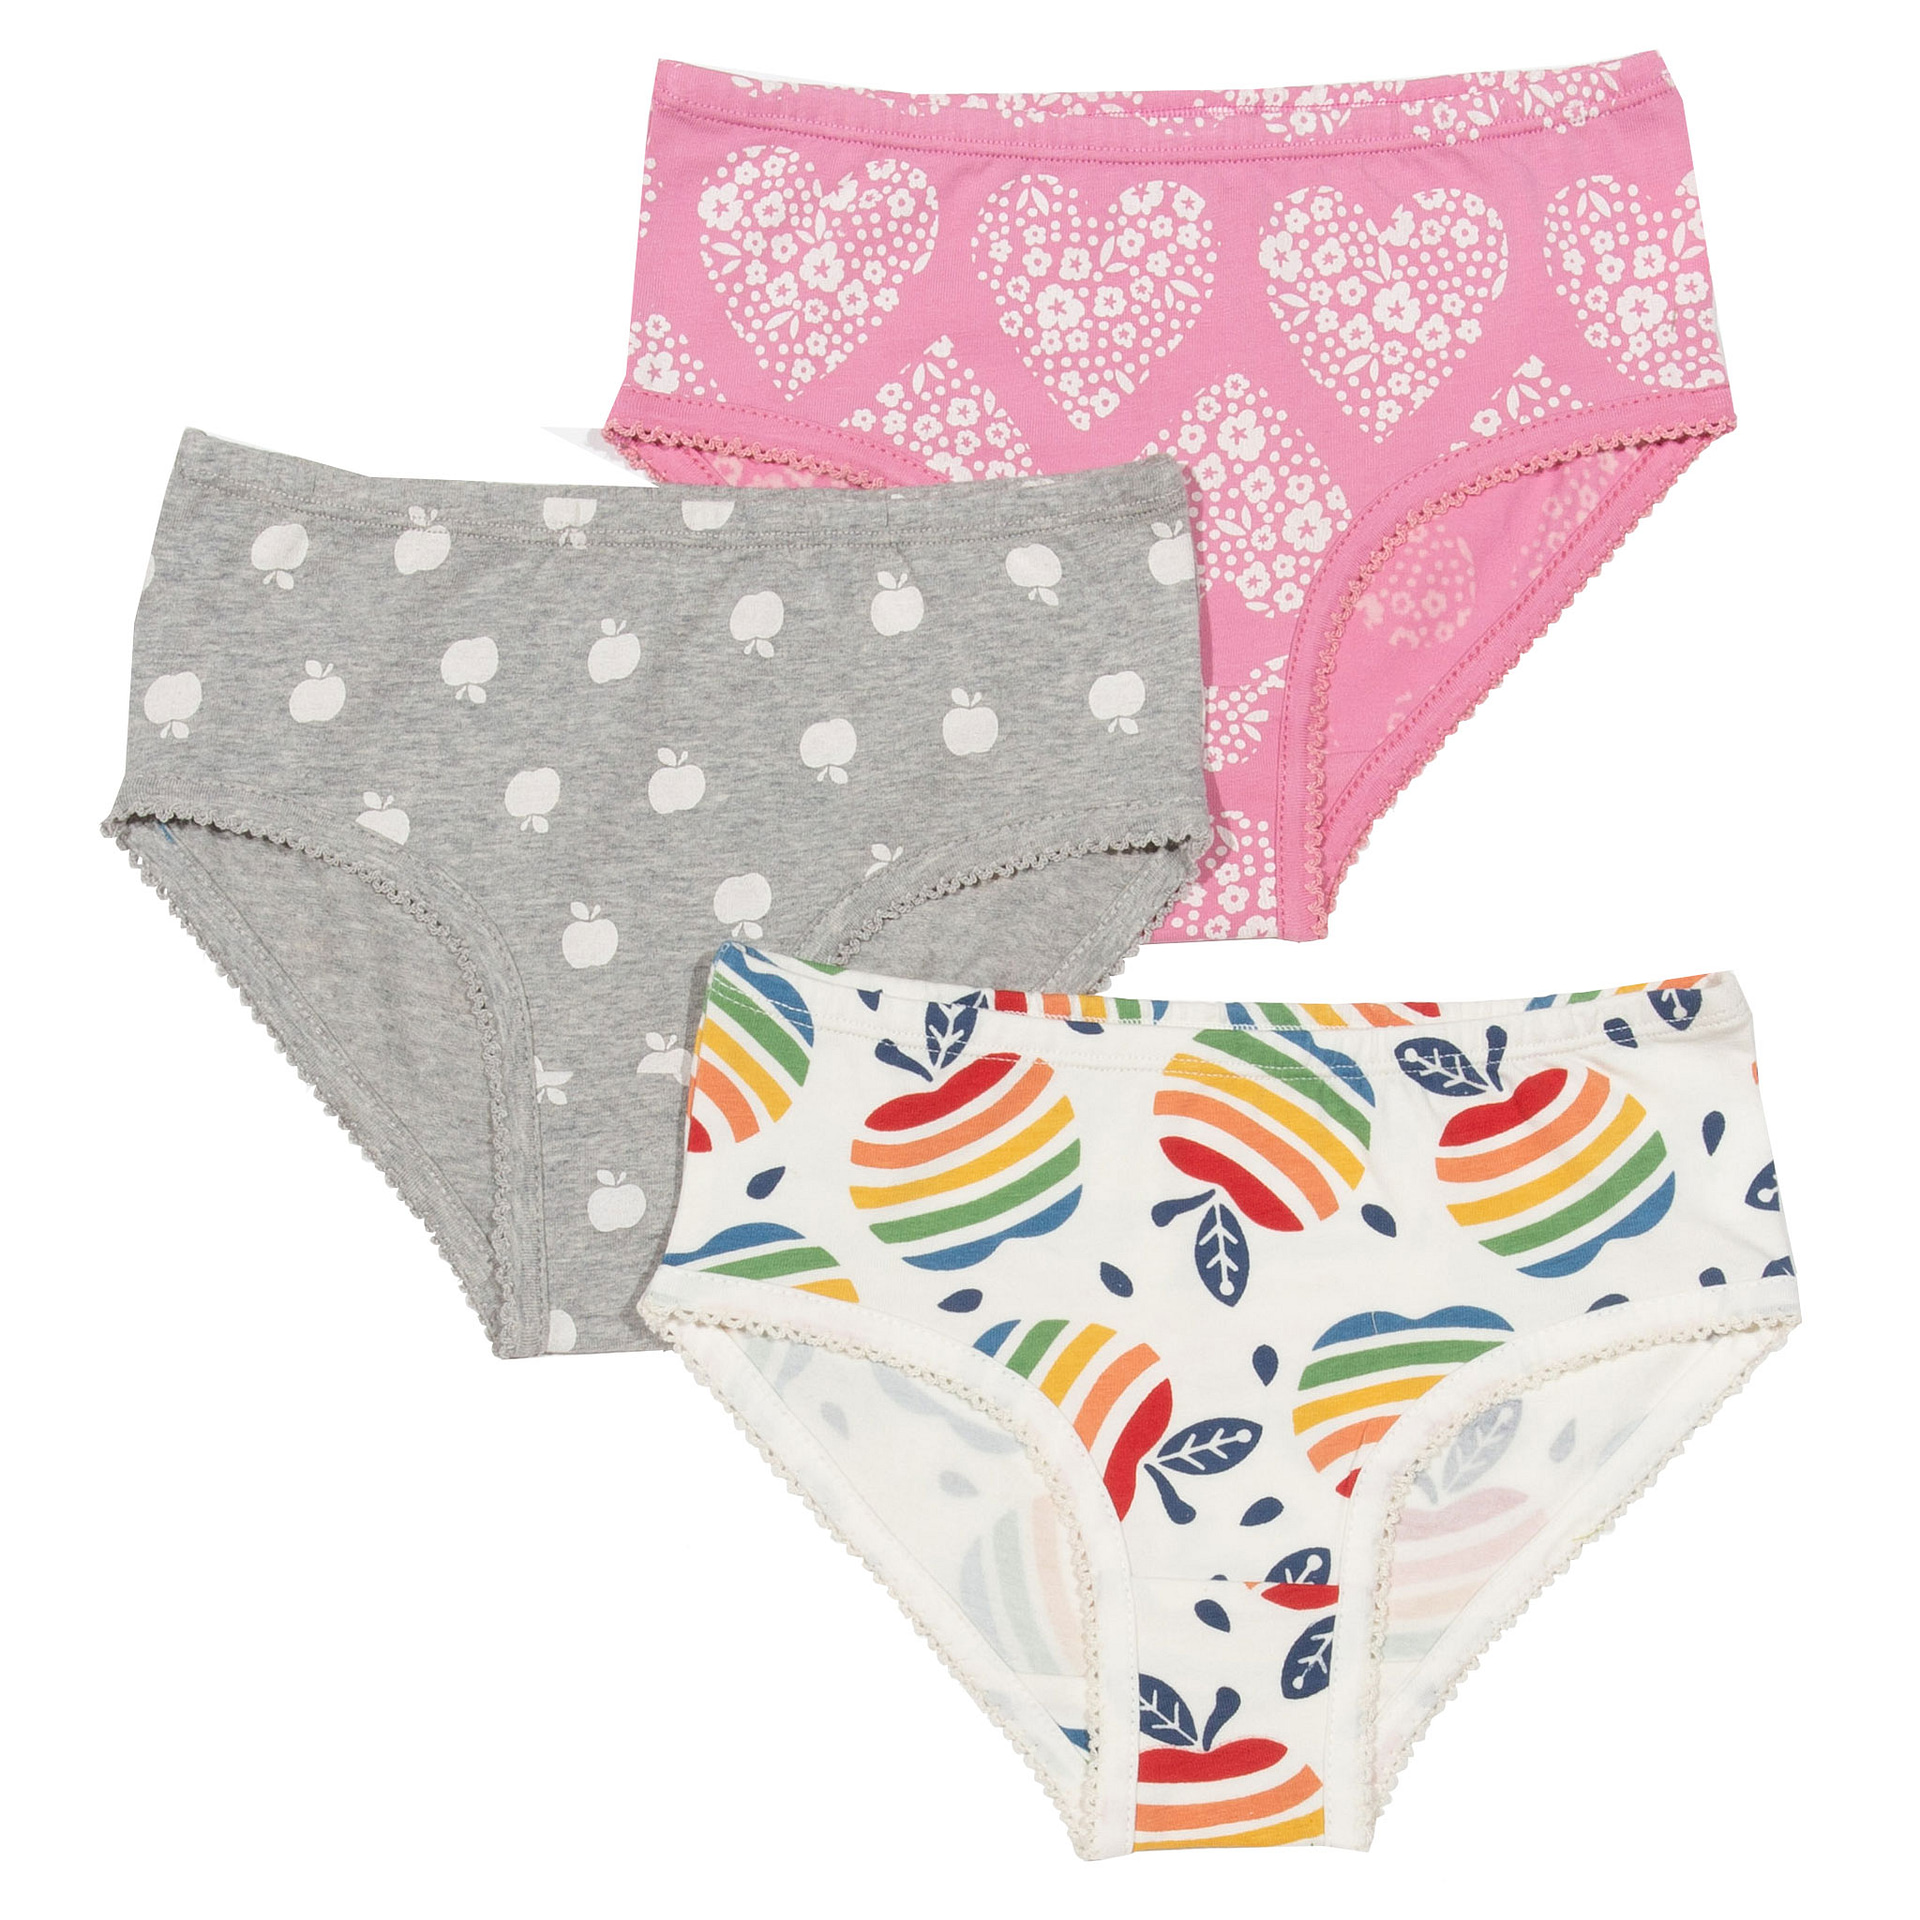 Awesome apple heart briefs in organic cotton by Kite – 3 pack